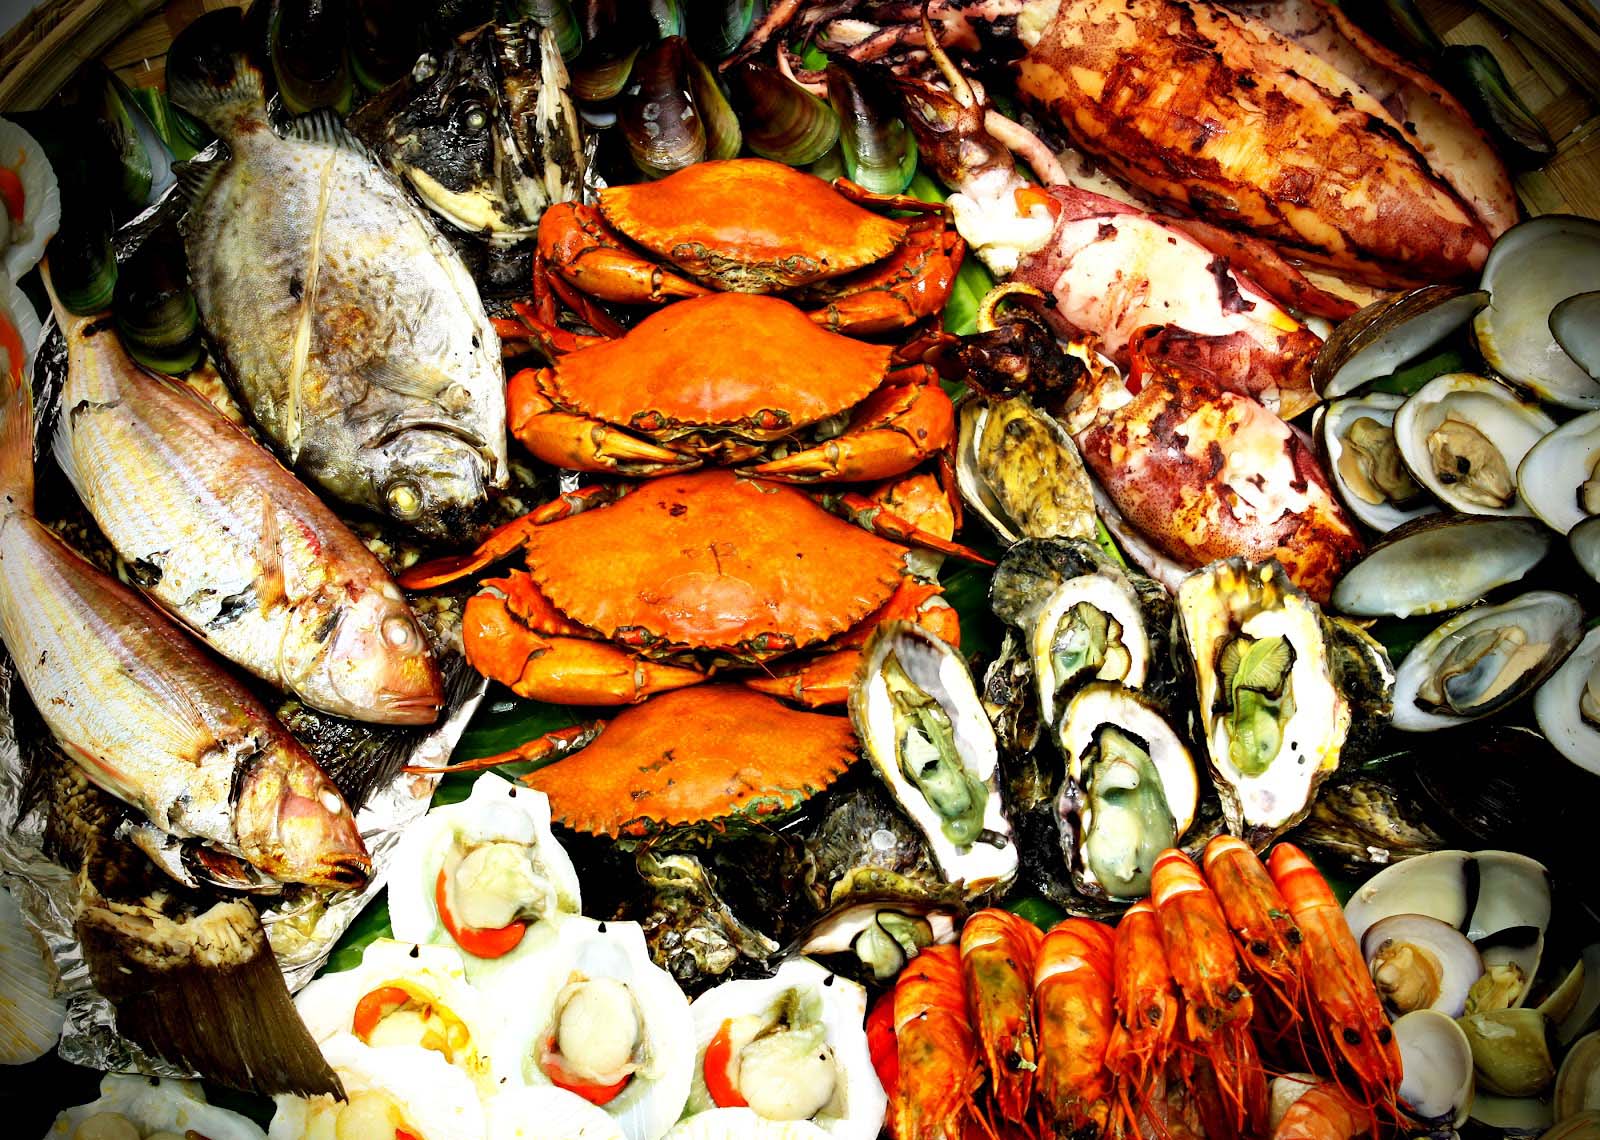 Food Trip: Where Seafood-Lovers Should Go